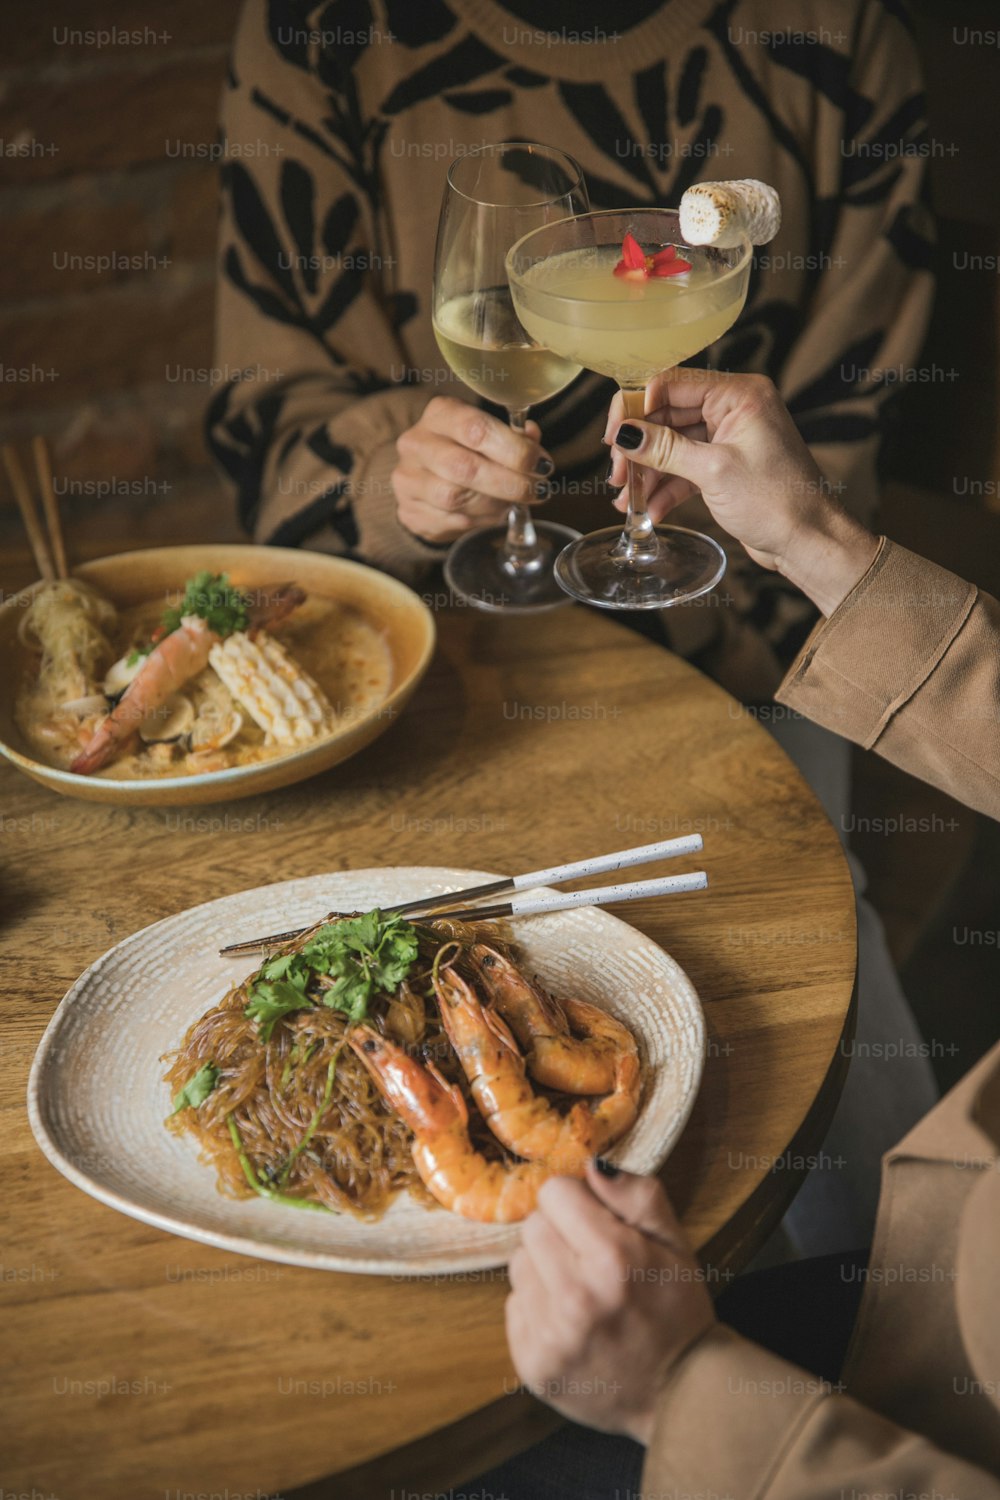 a person sitting at a table with a plate of food and a glass of wine